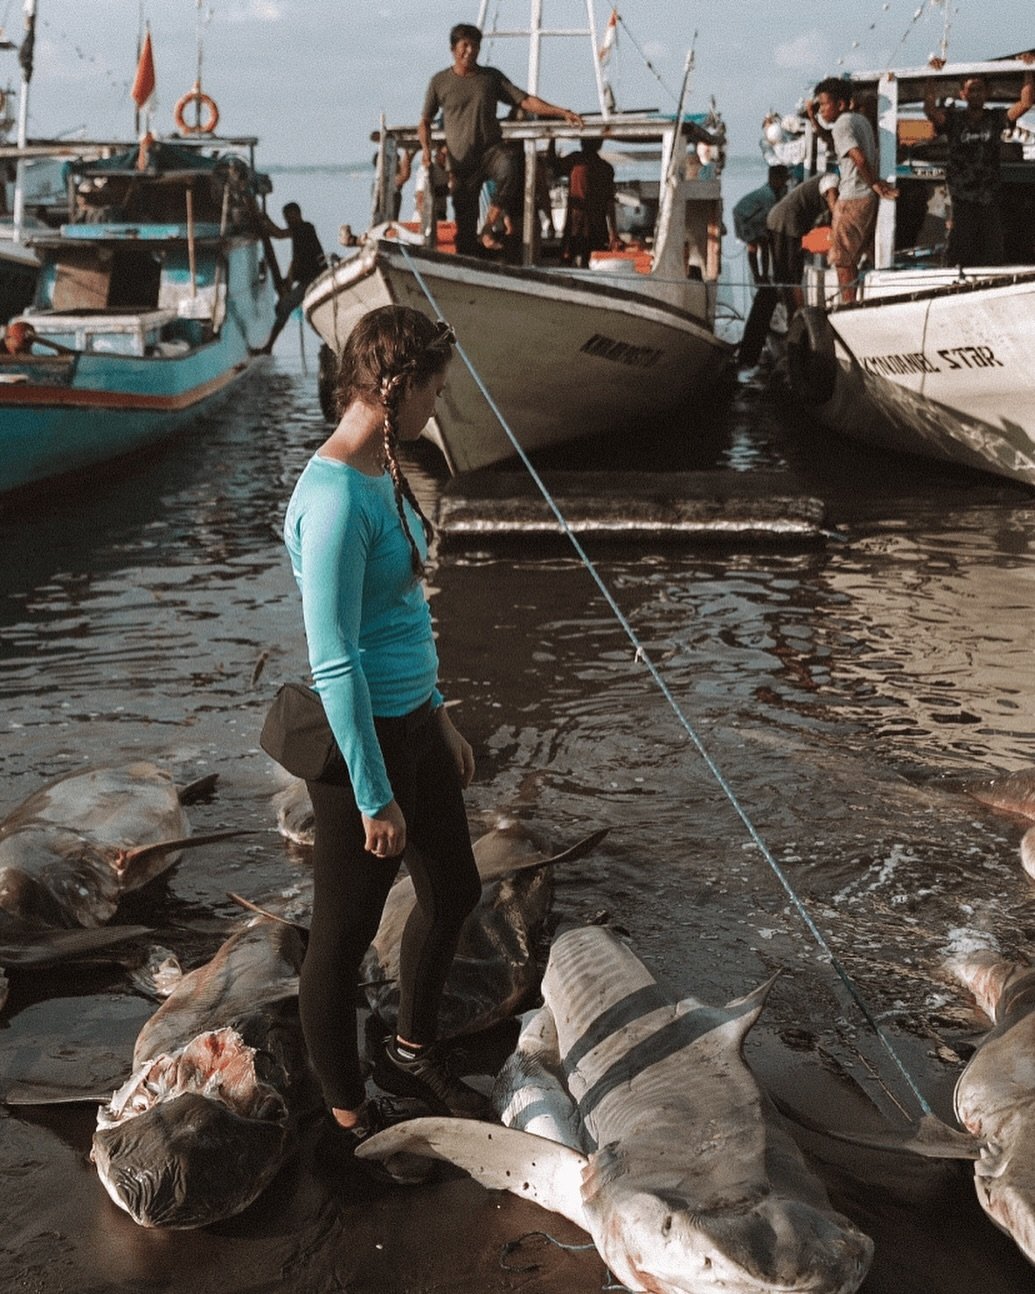 Some of us grow up studying sharks &amp; some of us grew up fishing them. It's when the two work together, that we can really change things. @travelingchels our shark tracking expert visited the market the morning before we went to sea to tag sharks.